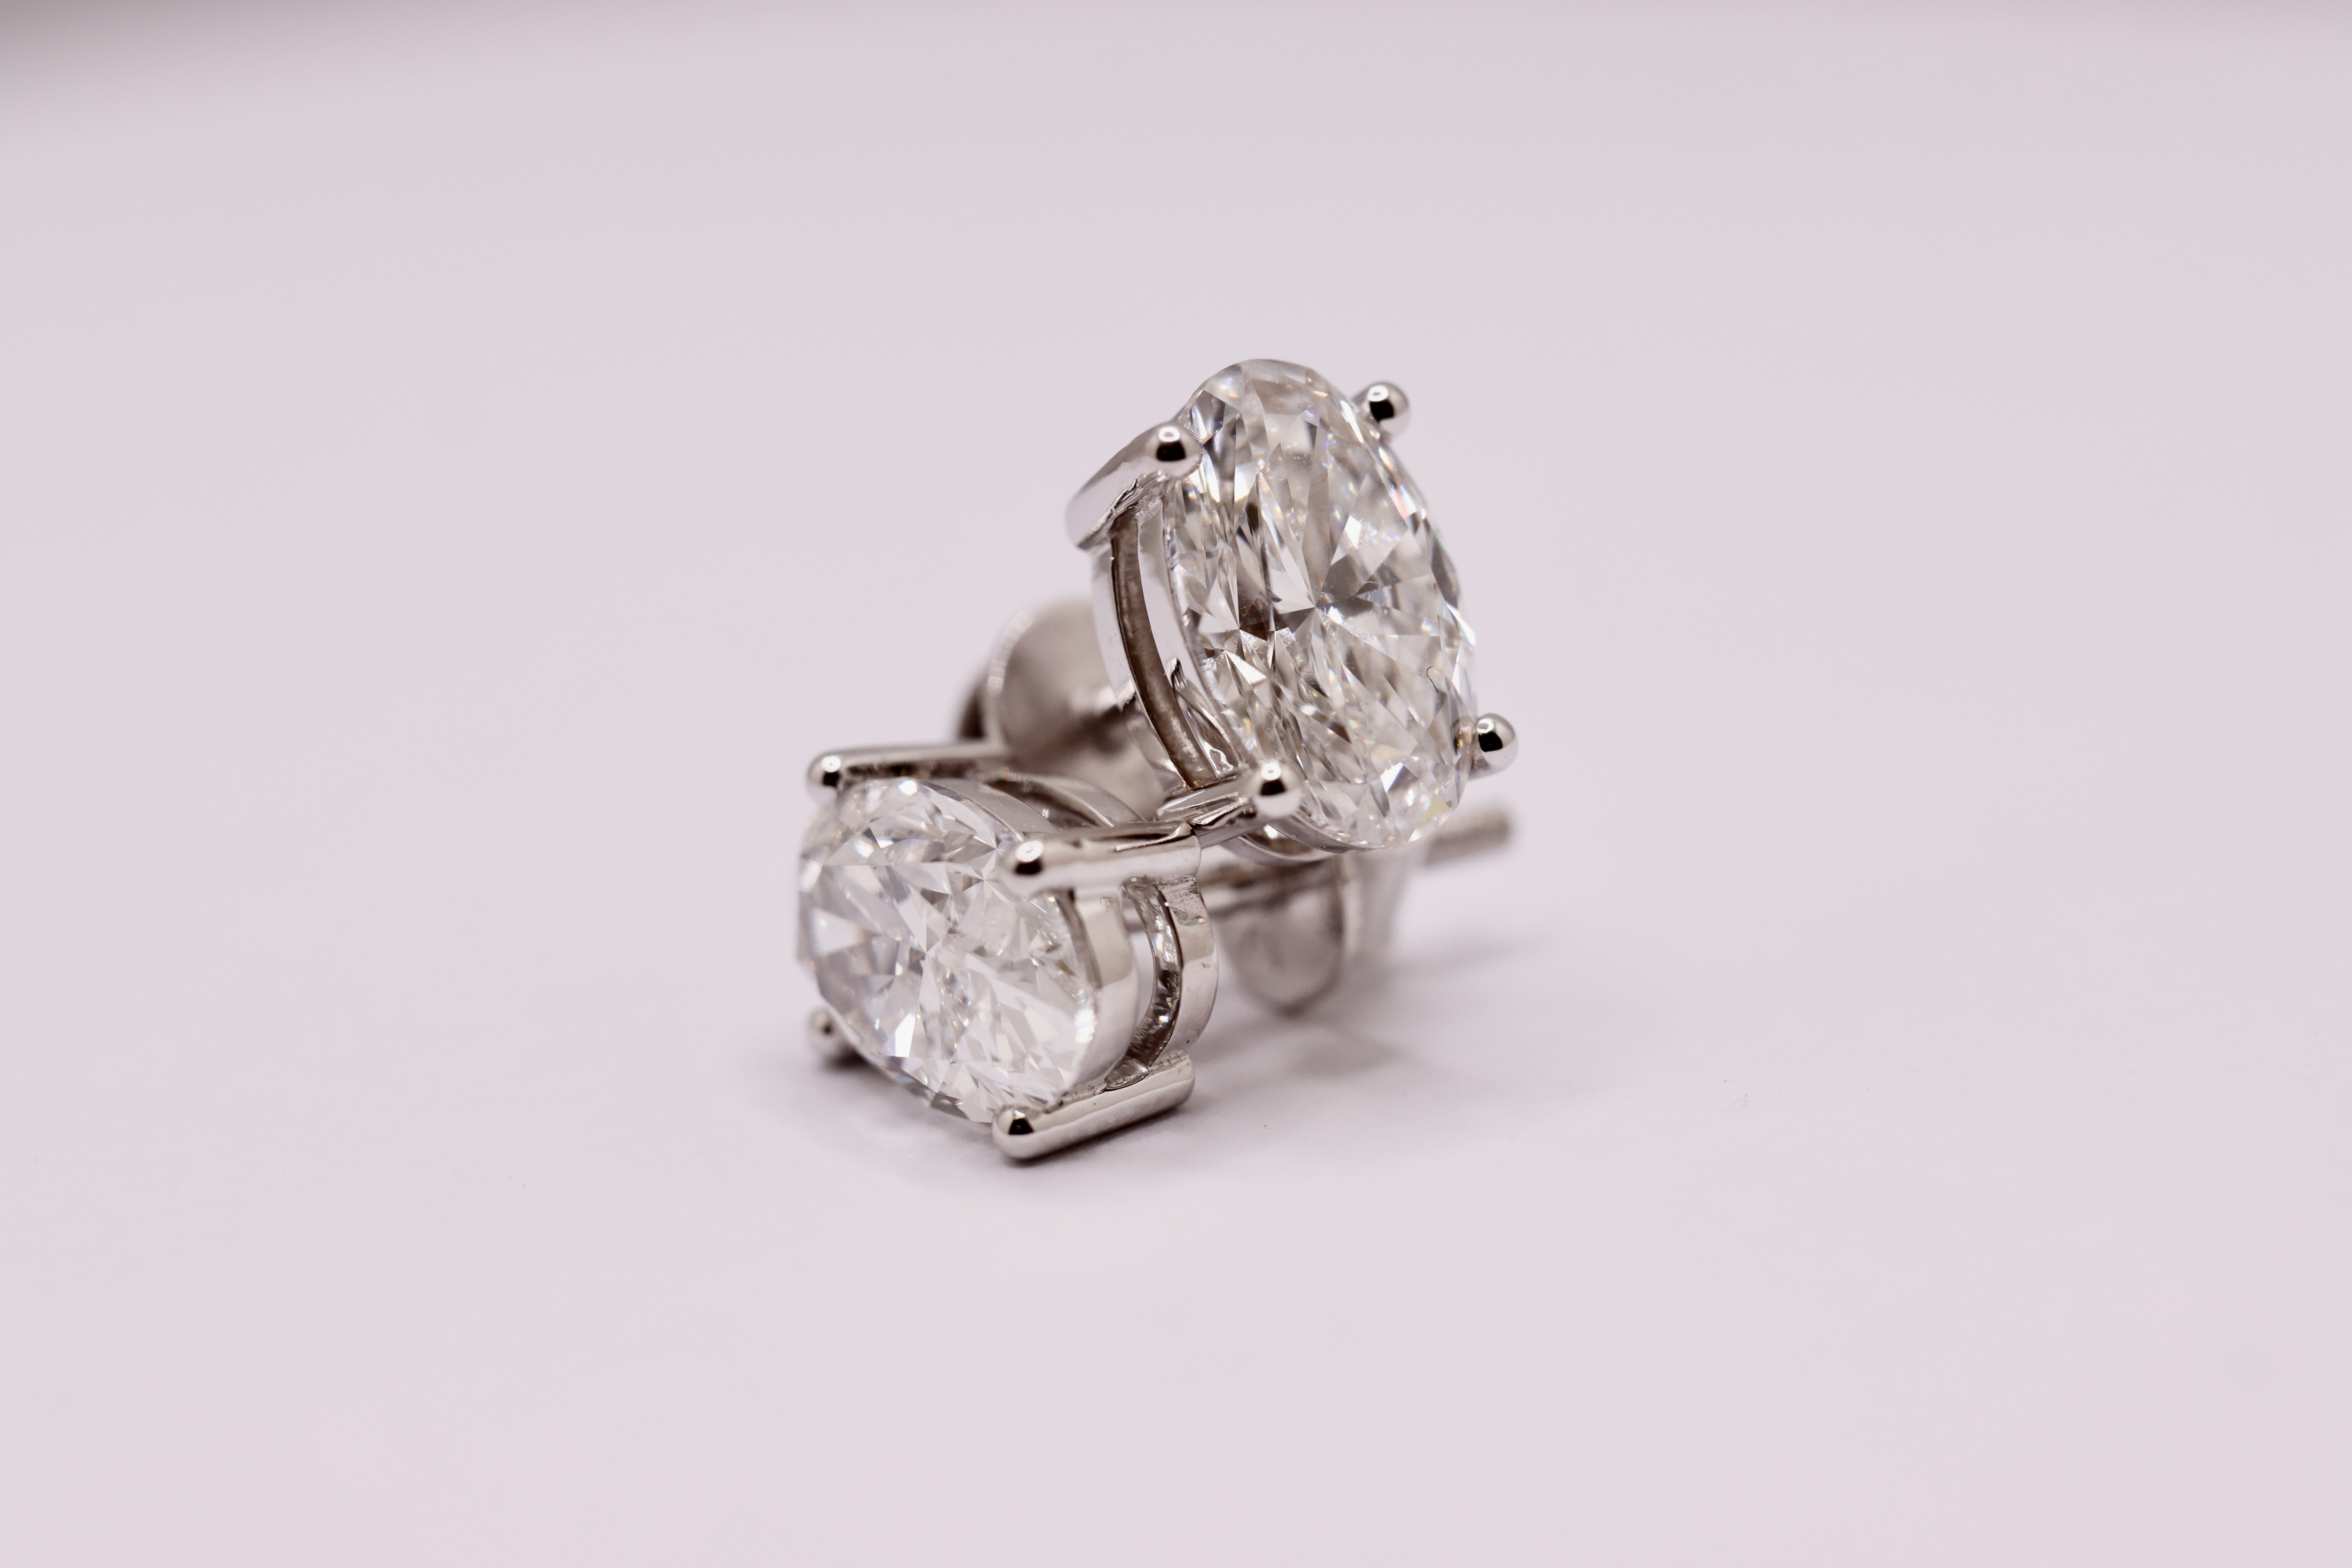 ** ON SALE ** Oval Brilliant Cut 3.02 Carat Diamond Earrings Set in 18kt White Gold - F Colour - VS1 - Image 3 of 9